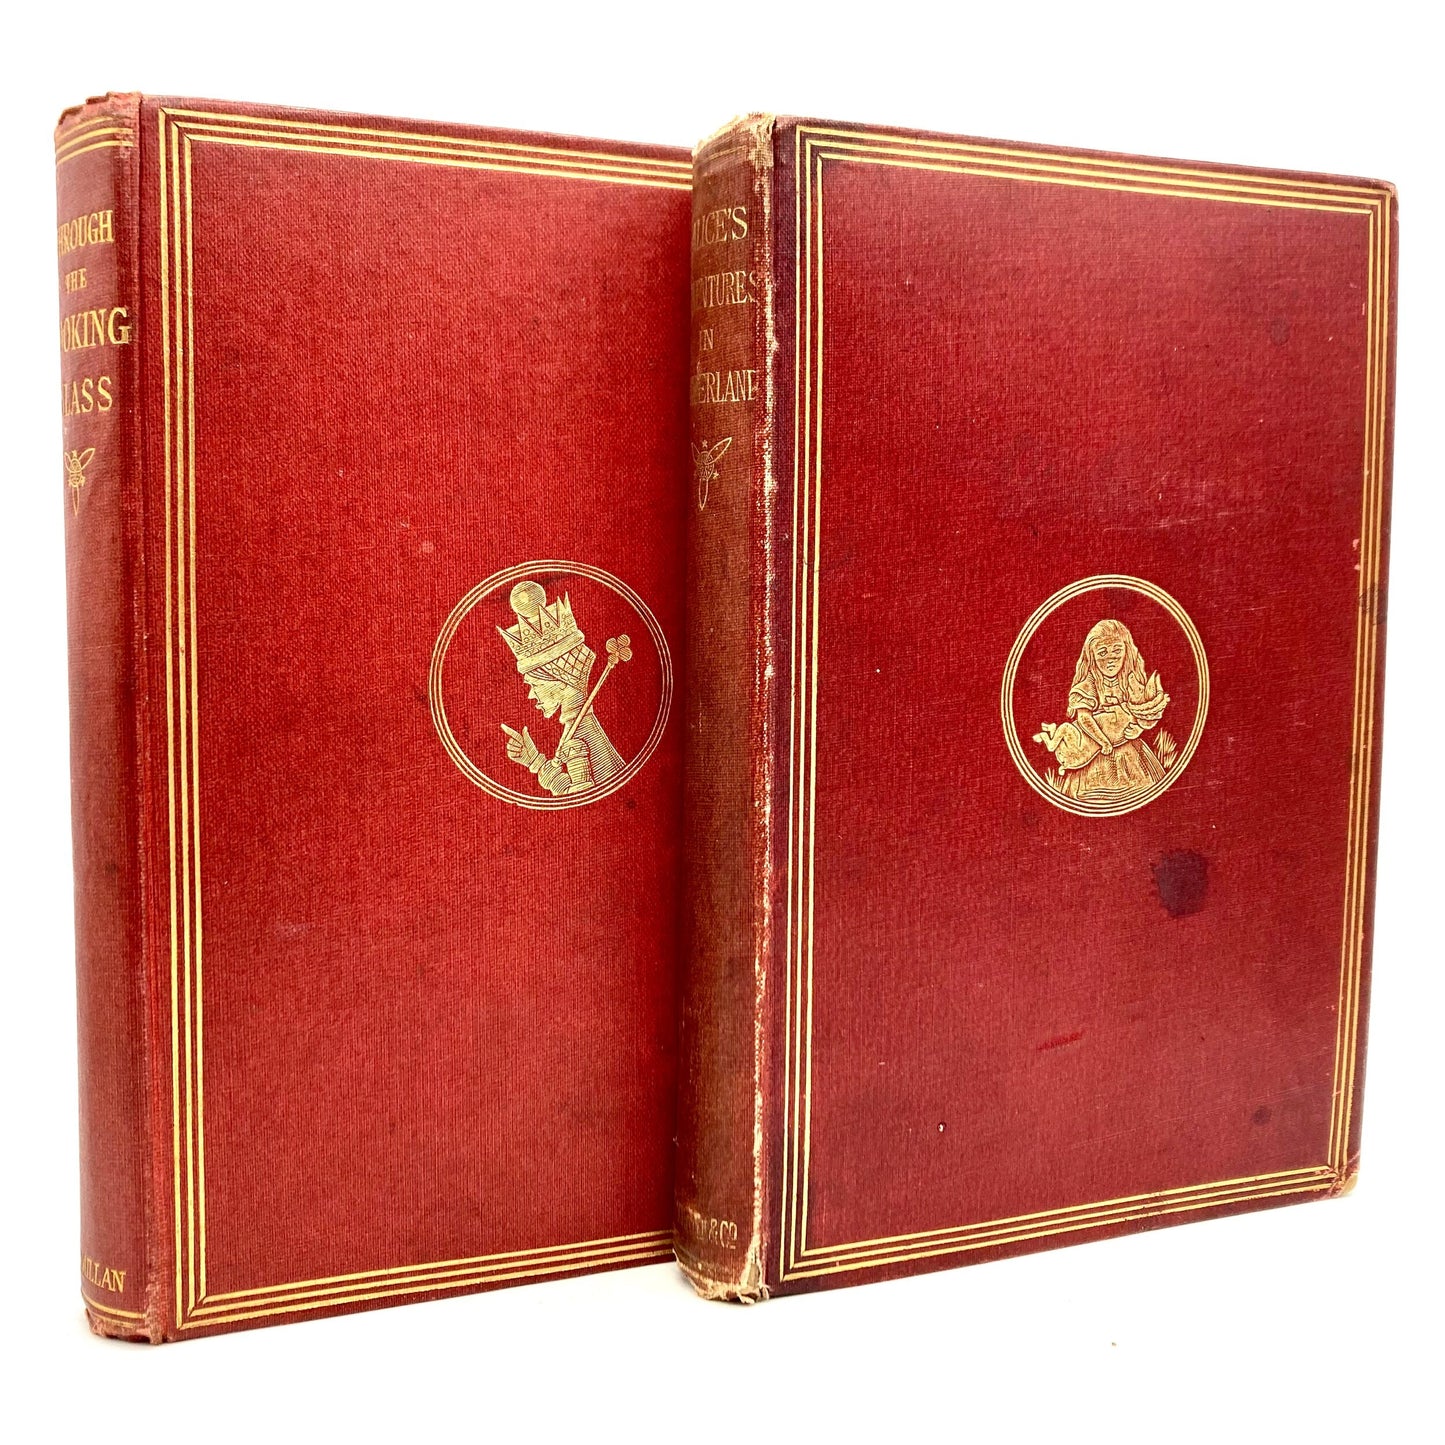 CARROLL, Lewis "Alice in Wonderland"/"Through the Looking Glass" [Macmillan, 1882/1872] (Signed) - Buzz Bookstore